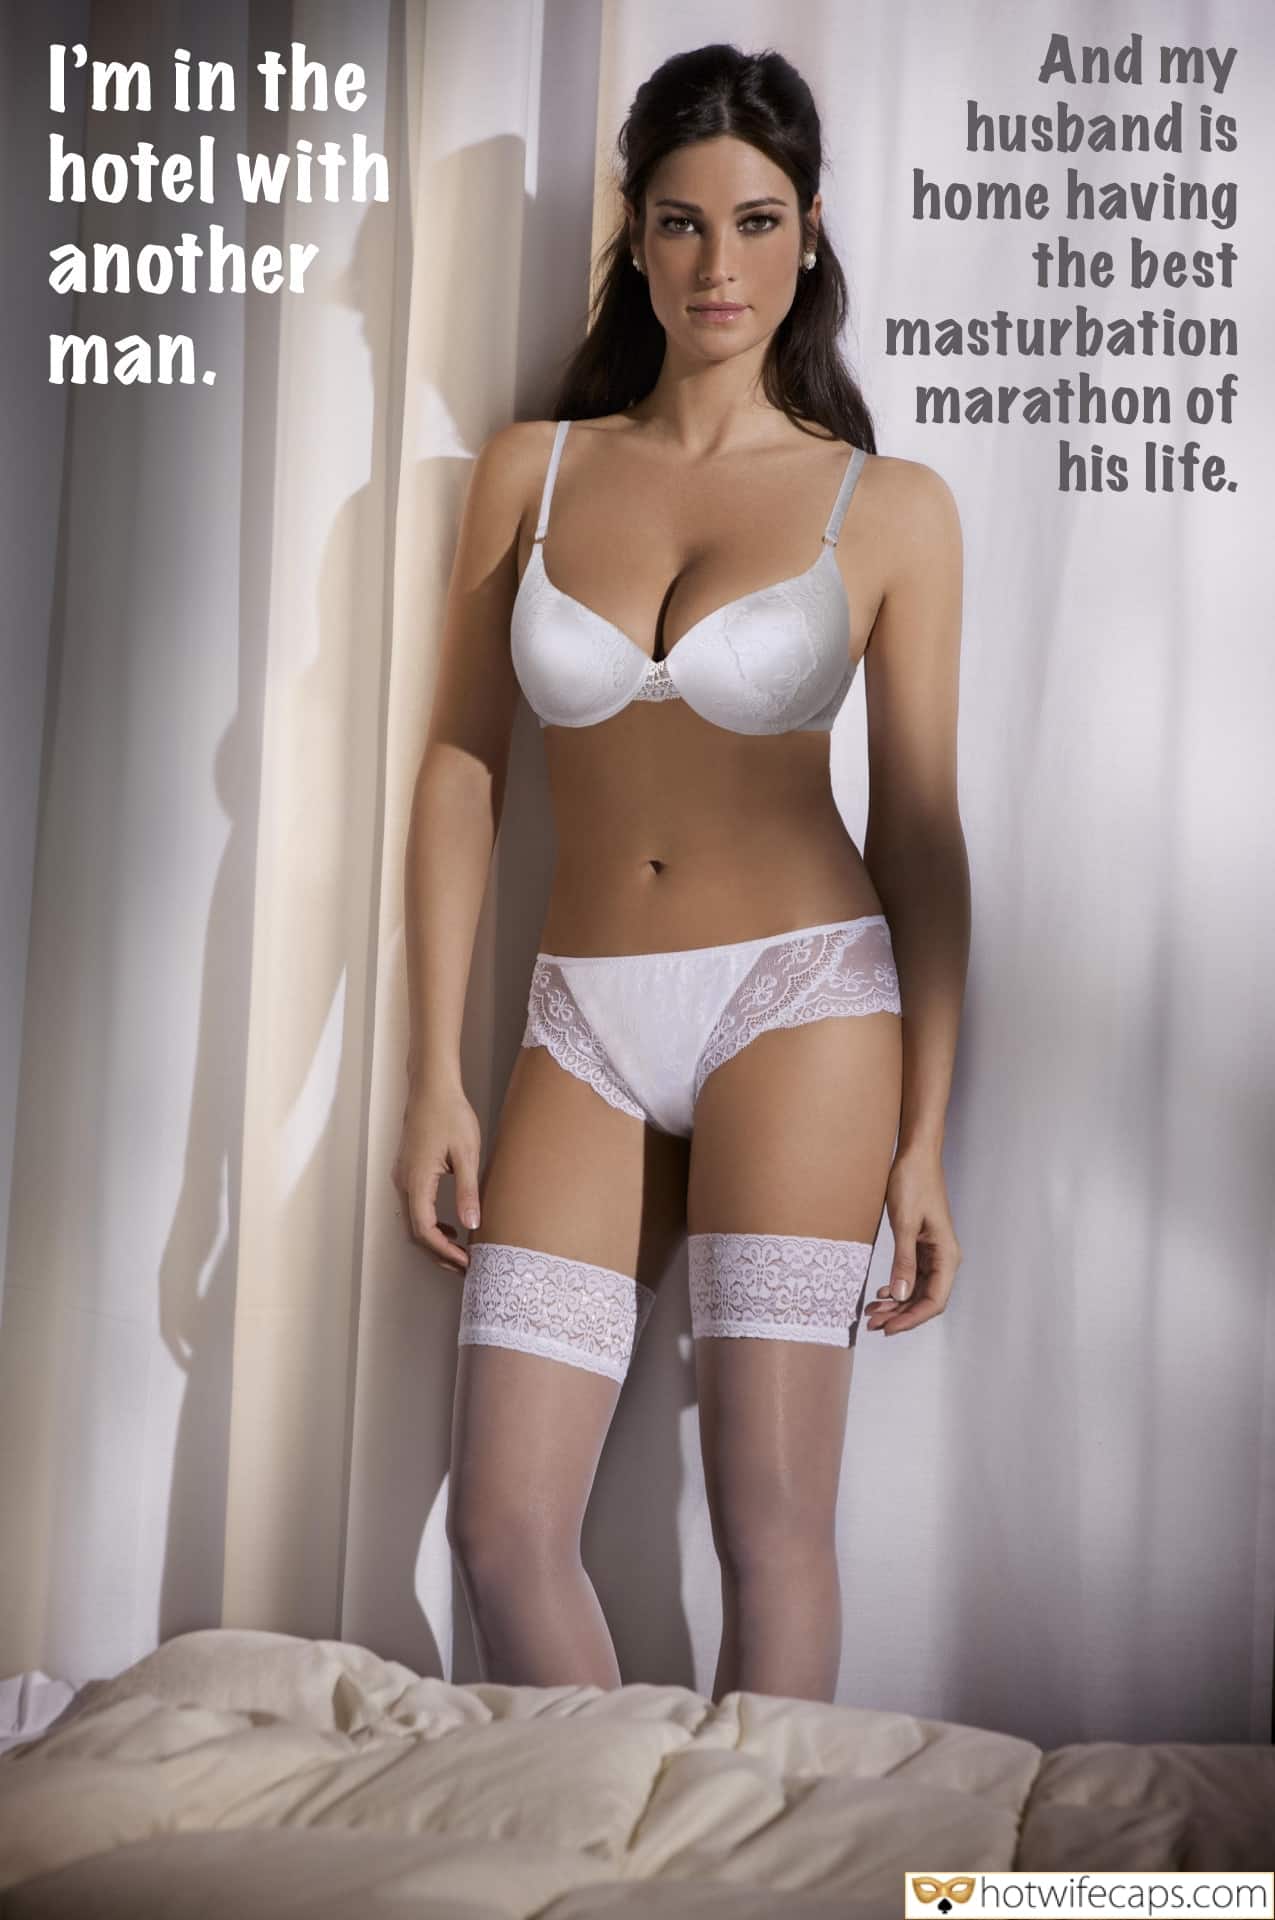 Wife Sharing Vacation Sexy Memes Masturbation hotwife caption: I’m in the hotel with another man. And my husband is home having the best masturbation marathon of his life. Mature Wife in White Underwear